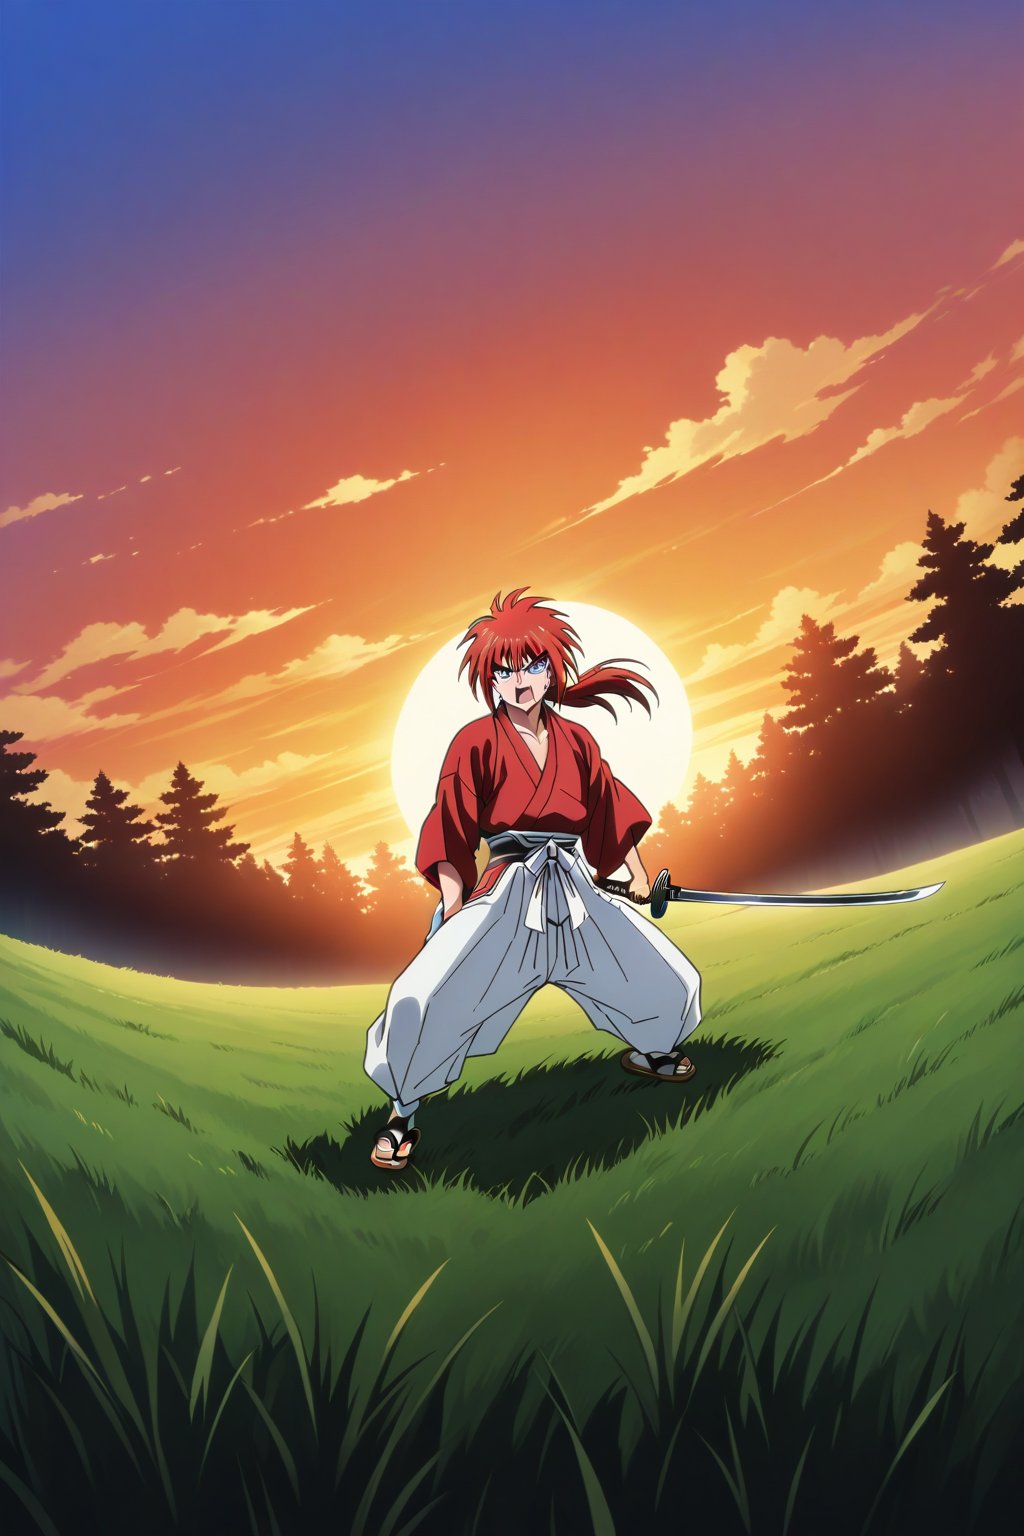 (masterpiece, best quality, ultra HD anime quality, super high resolution, 1980s/(style), retro, anatomically correct, perfect anatomy), (Himura Kenshin), one boy, solo, (red hair, long hair, low ponytail, thick bangs between the eyes, messy hair, purple eyes, sharp eyes, scar on face, angry face), emitting aura, (mouth open as if screaming), looking at the camera, (red kimono top, white hakama pants, black waistband), weapon, one Japanese sword, (Japanese sword has blade, tsuba, grip), wearing straw sandals, (four fingers and one thumb), (taking a fighting stance, holding the grip of the Japanese sword, standing low, legs spread wide, alone, in a grassland), (sunset view, distant forest, large grassland, dim grassland, grass, sunset), (front, angle from below), score 9, score 8_up, score 7_up, score 6_up,Himura Kenshin,red hair